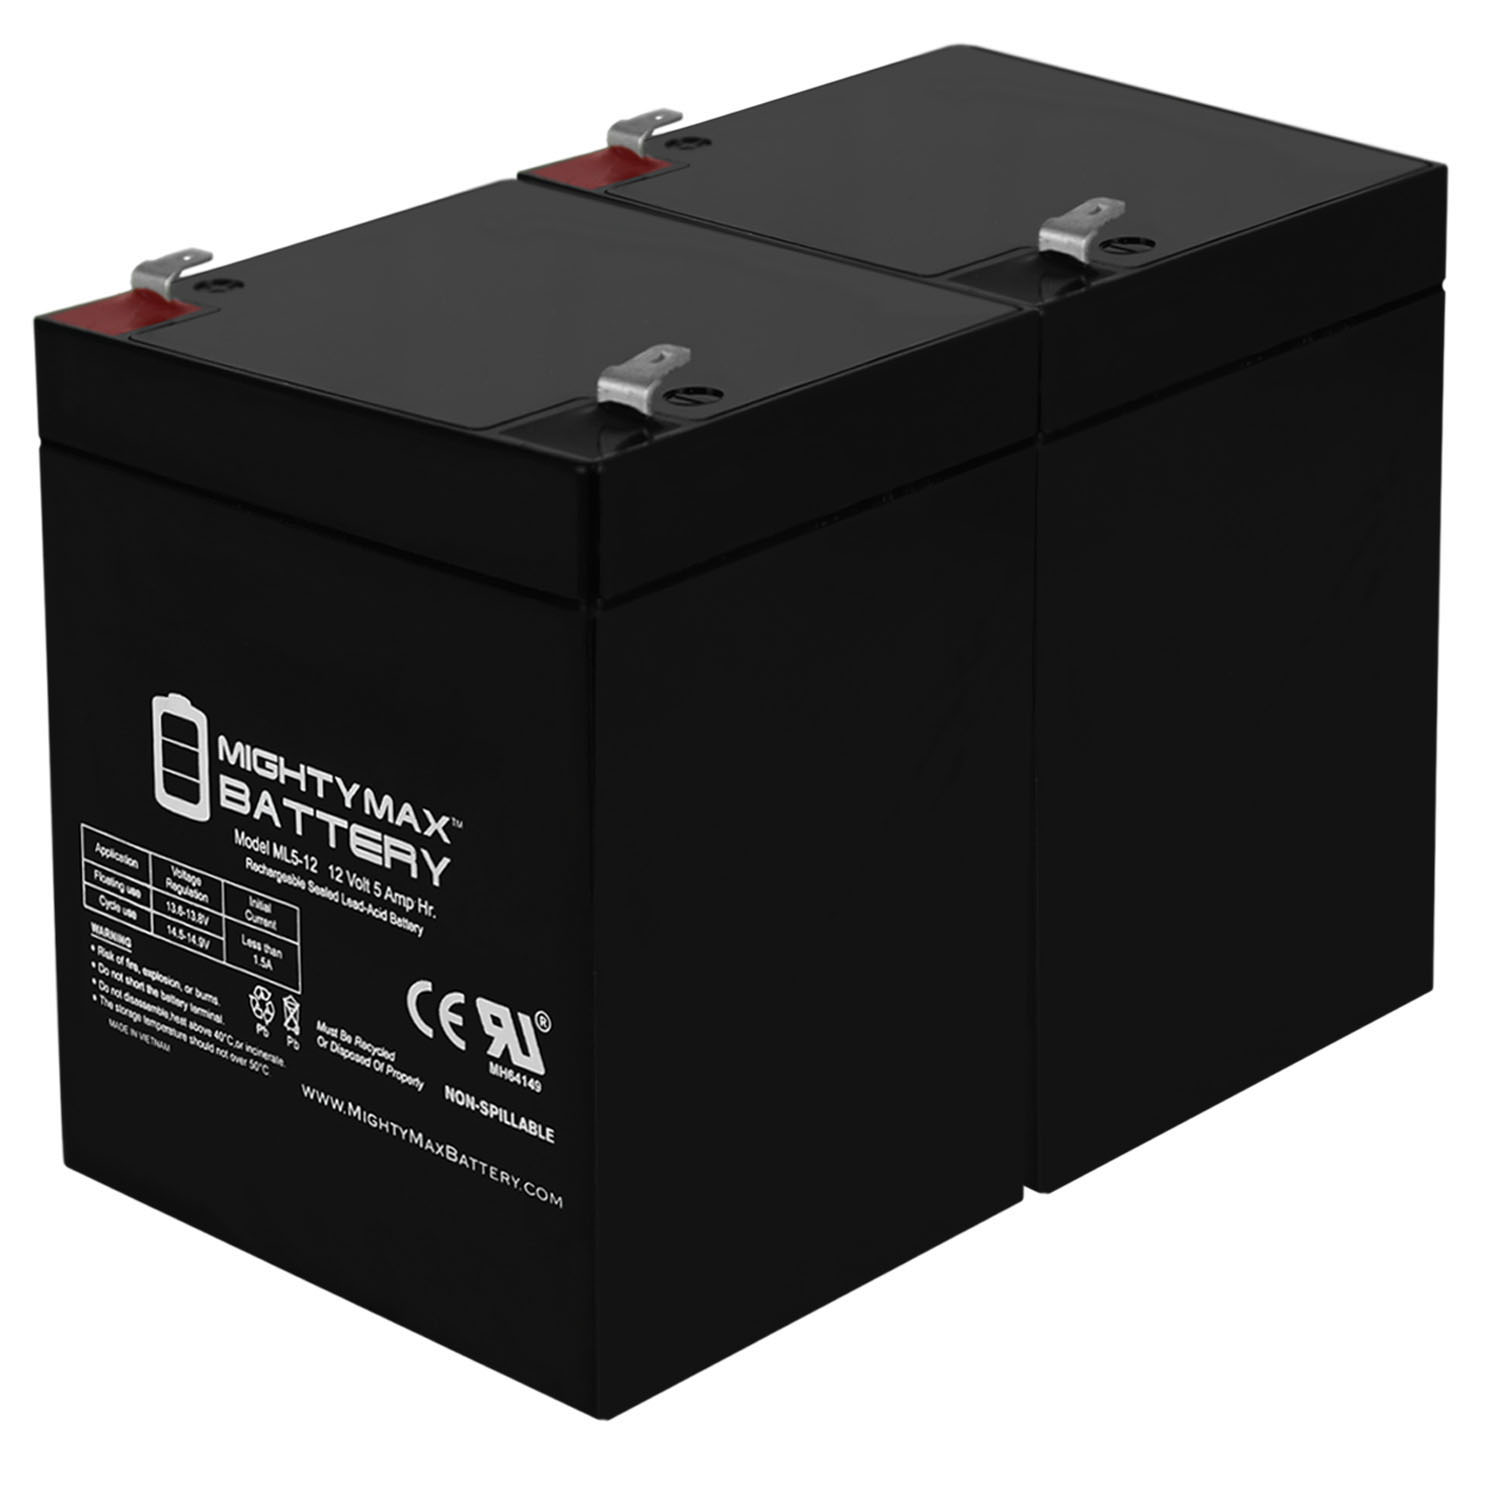 12V 5AH SLA Replacement Battery for GS Portalac PX12050 - 2 Pack